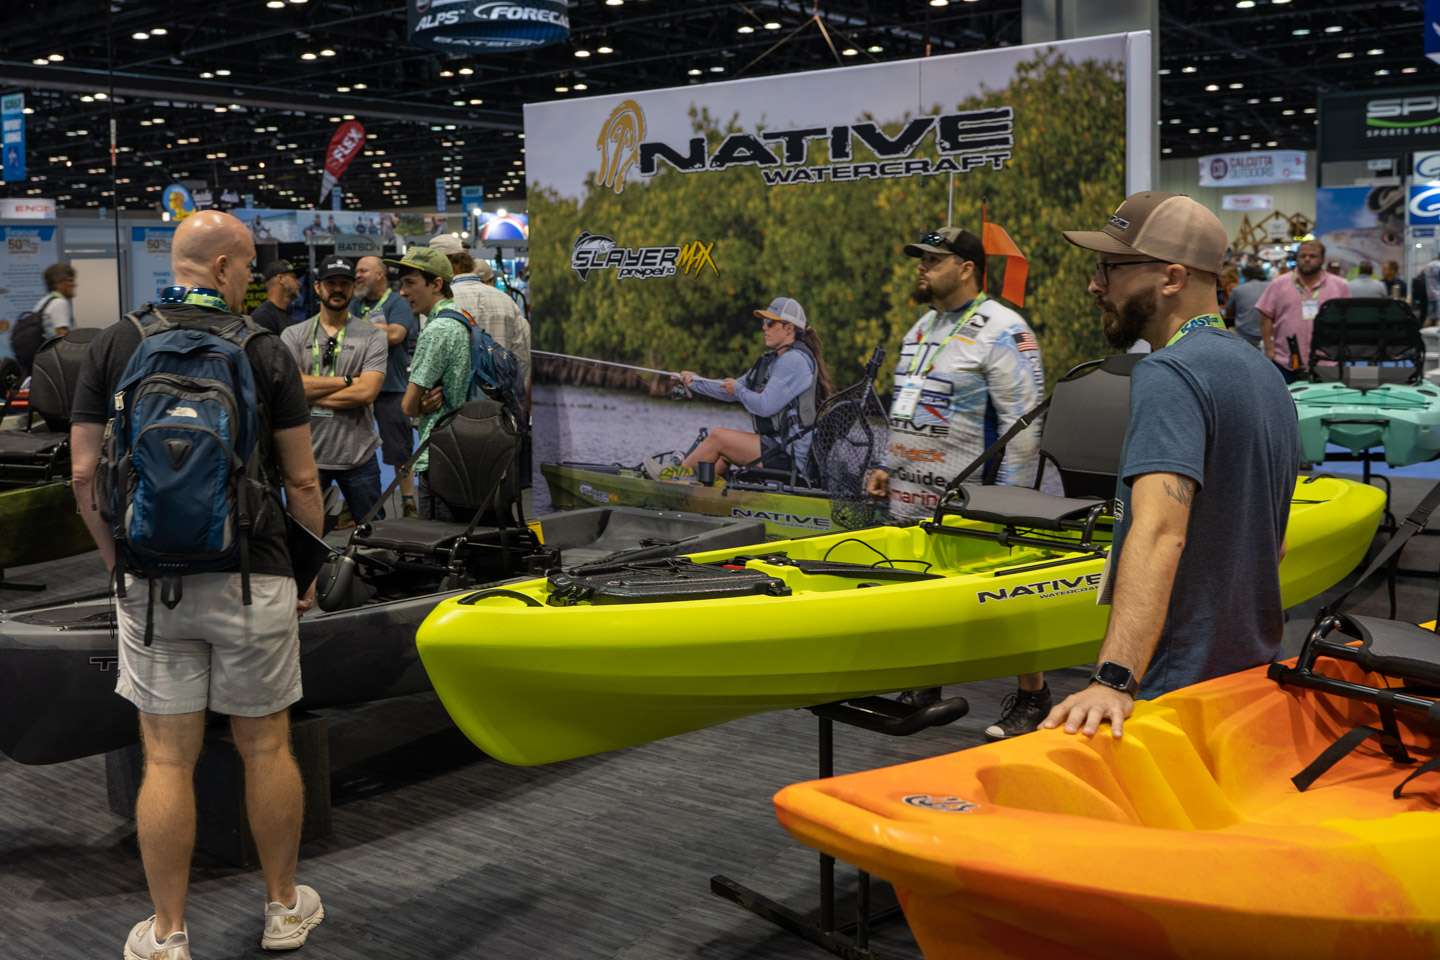 Native released their newest kayak â the Slayermax 10.